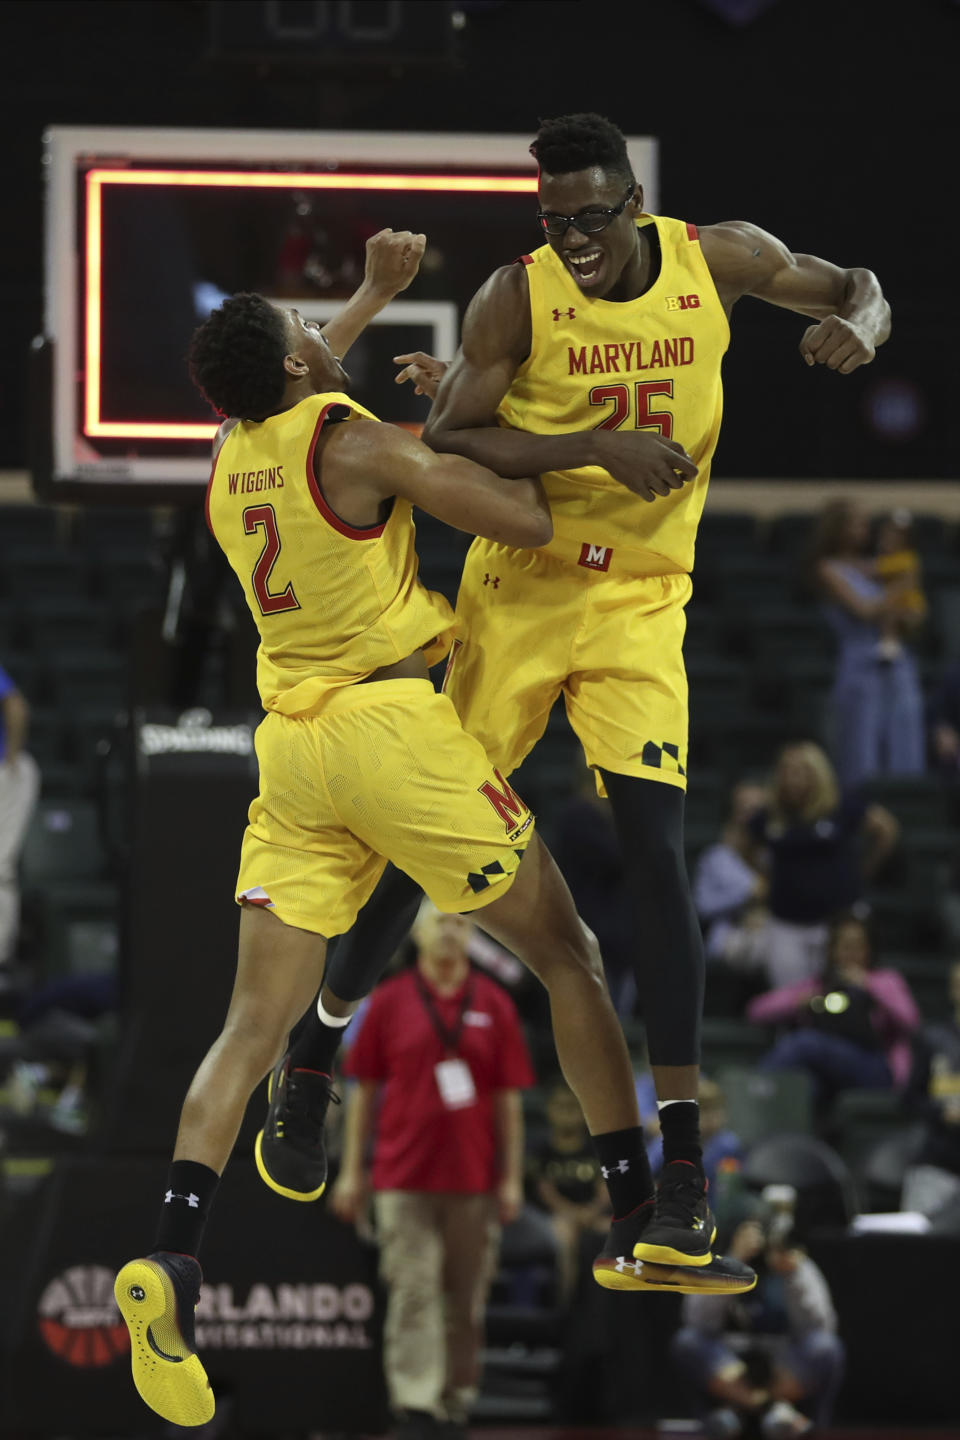 Maryland forwards Jalen Smith (25) and Makhel Mitchell (22) celebrate after defeating Marquette in an NCAA college basketball game Sunday, Dec. 1, 2019, in Lake Buena Vista, Fla. (AP Photo/Scott Audette)